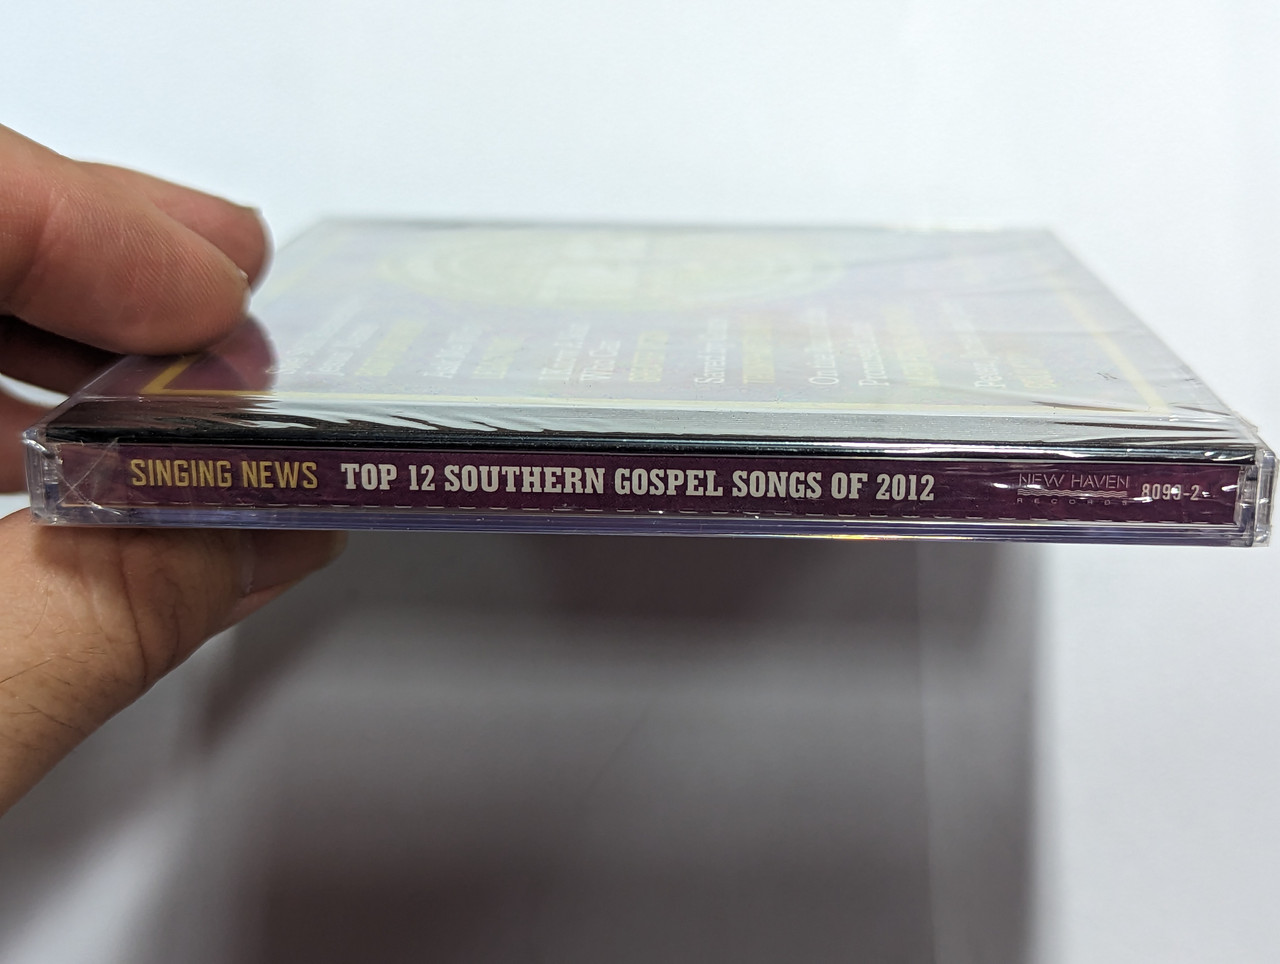 https://cdn10.bigcommerce.com/s-62bdpkt7pb/products/0/images/303415/Singing_News_Fan_Awards_Top_12_Southern_Gospel_Songs_Of_2012_She_Still_Remembers_Jesus_Name_-_Booth_Brothers_Ask_Me_Why_-_Legacy_Five_I_Know_A_Man_Who_Can_-_Greater_Vision_Saved_by_Gra_3__11898.1697040375.1280.1280.jpg?c=2&_gl=1*96m6am*_ga*MjA2NTIxMjE2MC4xNTkwNTEyNTMy*_ga_WS2VZYPC6G*MTY5NzAyOTYwNy4xMDk3LjEuMTY5NzA0MDE2Ny41OC4wLjA.